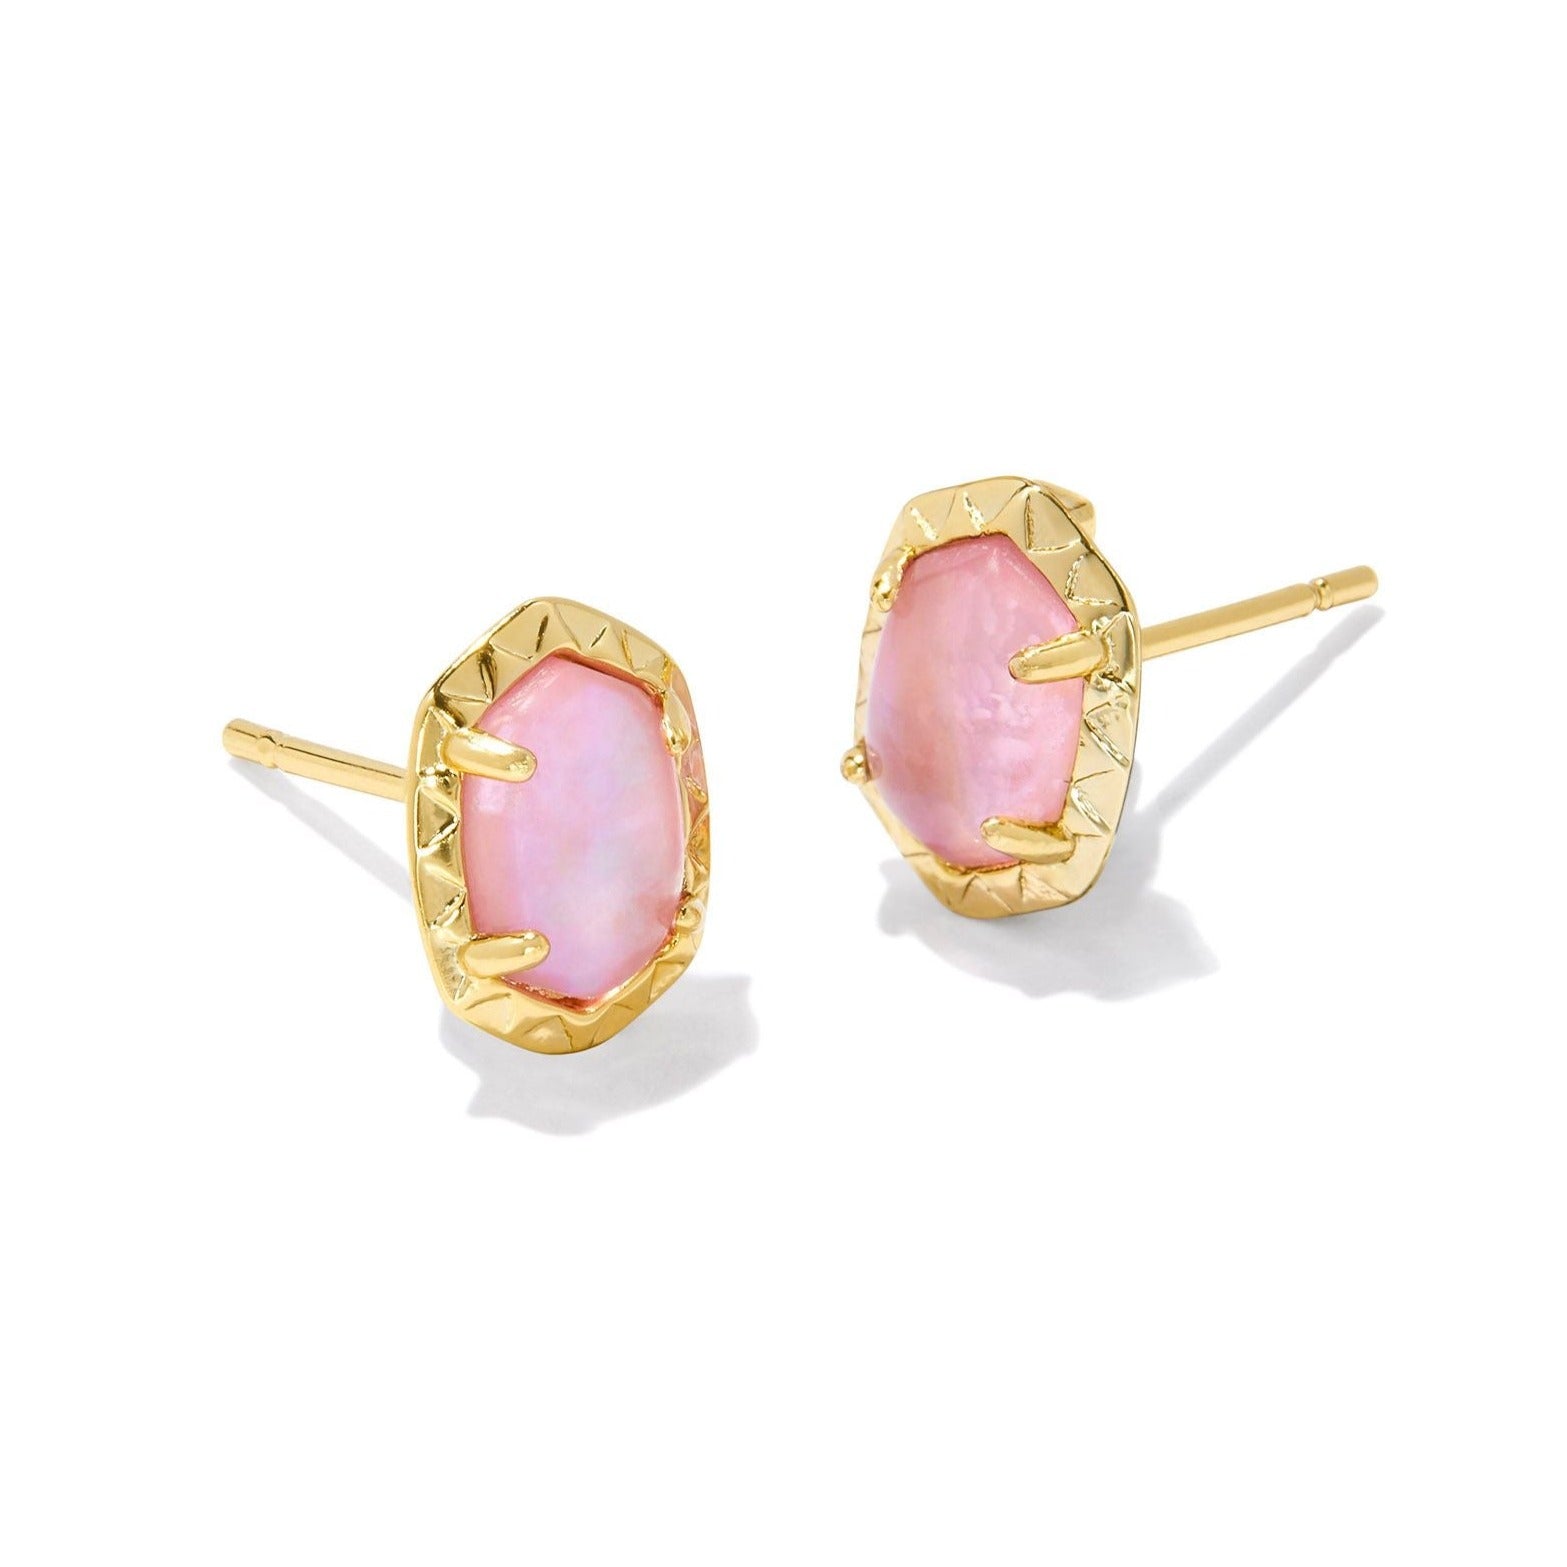 Kendra Scott | Daphne Gold Stud Earrings in Light Pink Iridescent Abalone - Giddy Up Glamour Boutique